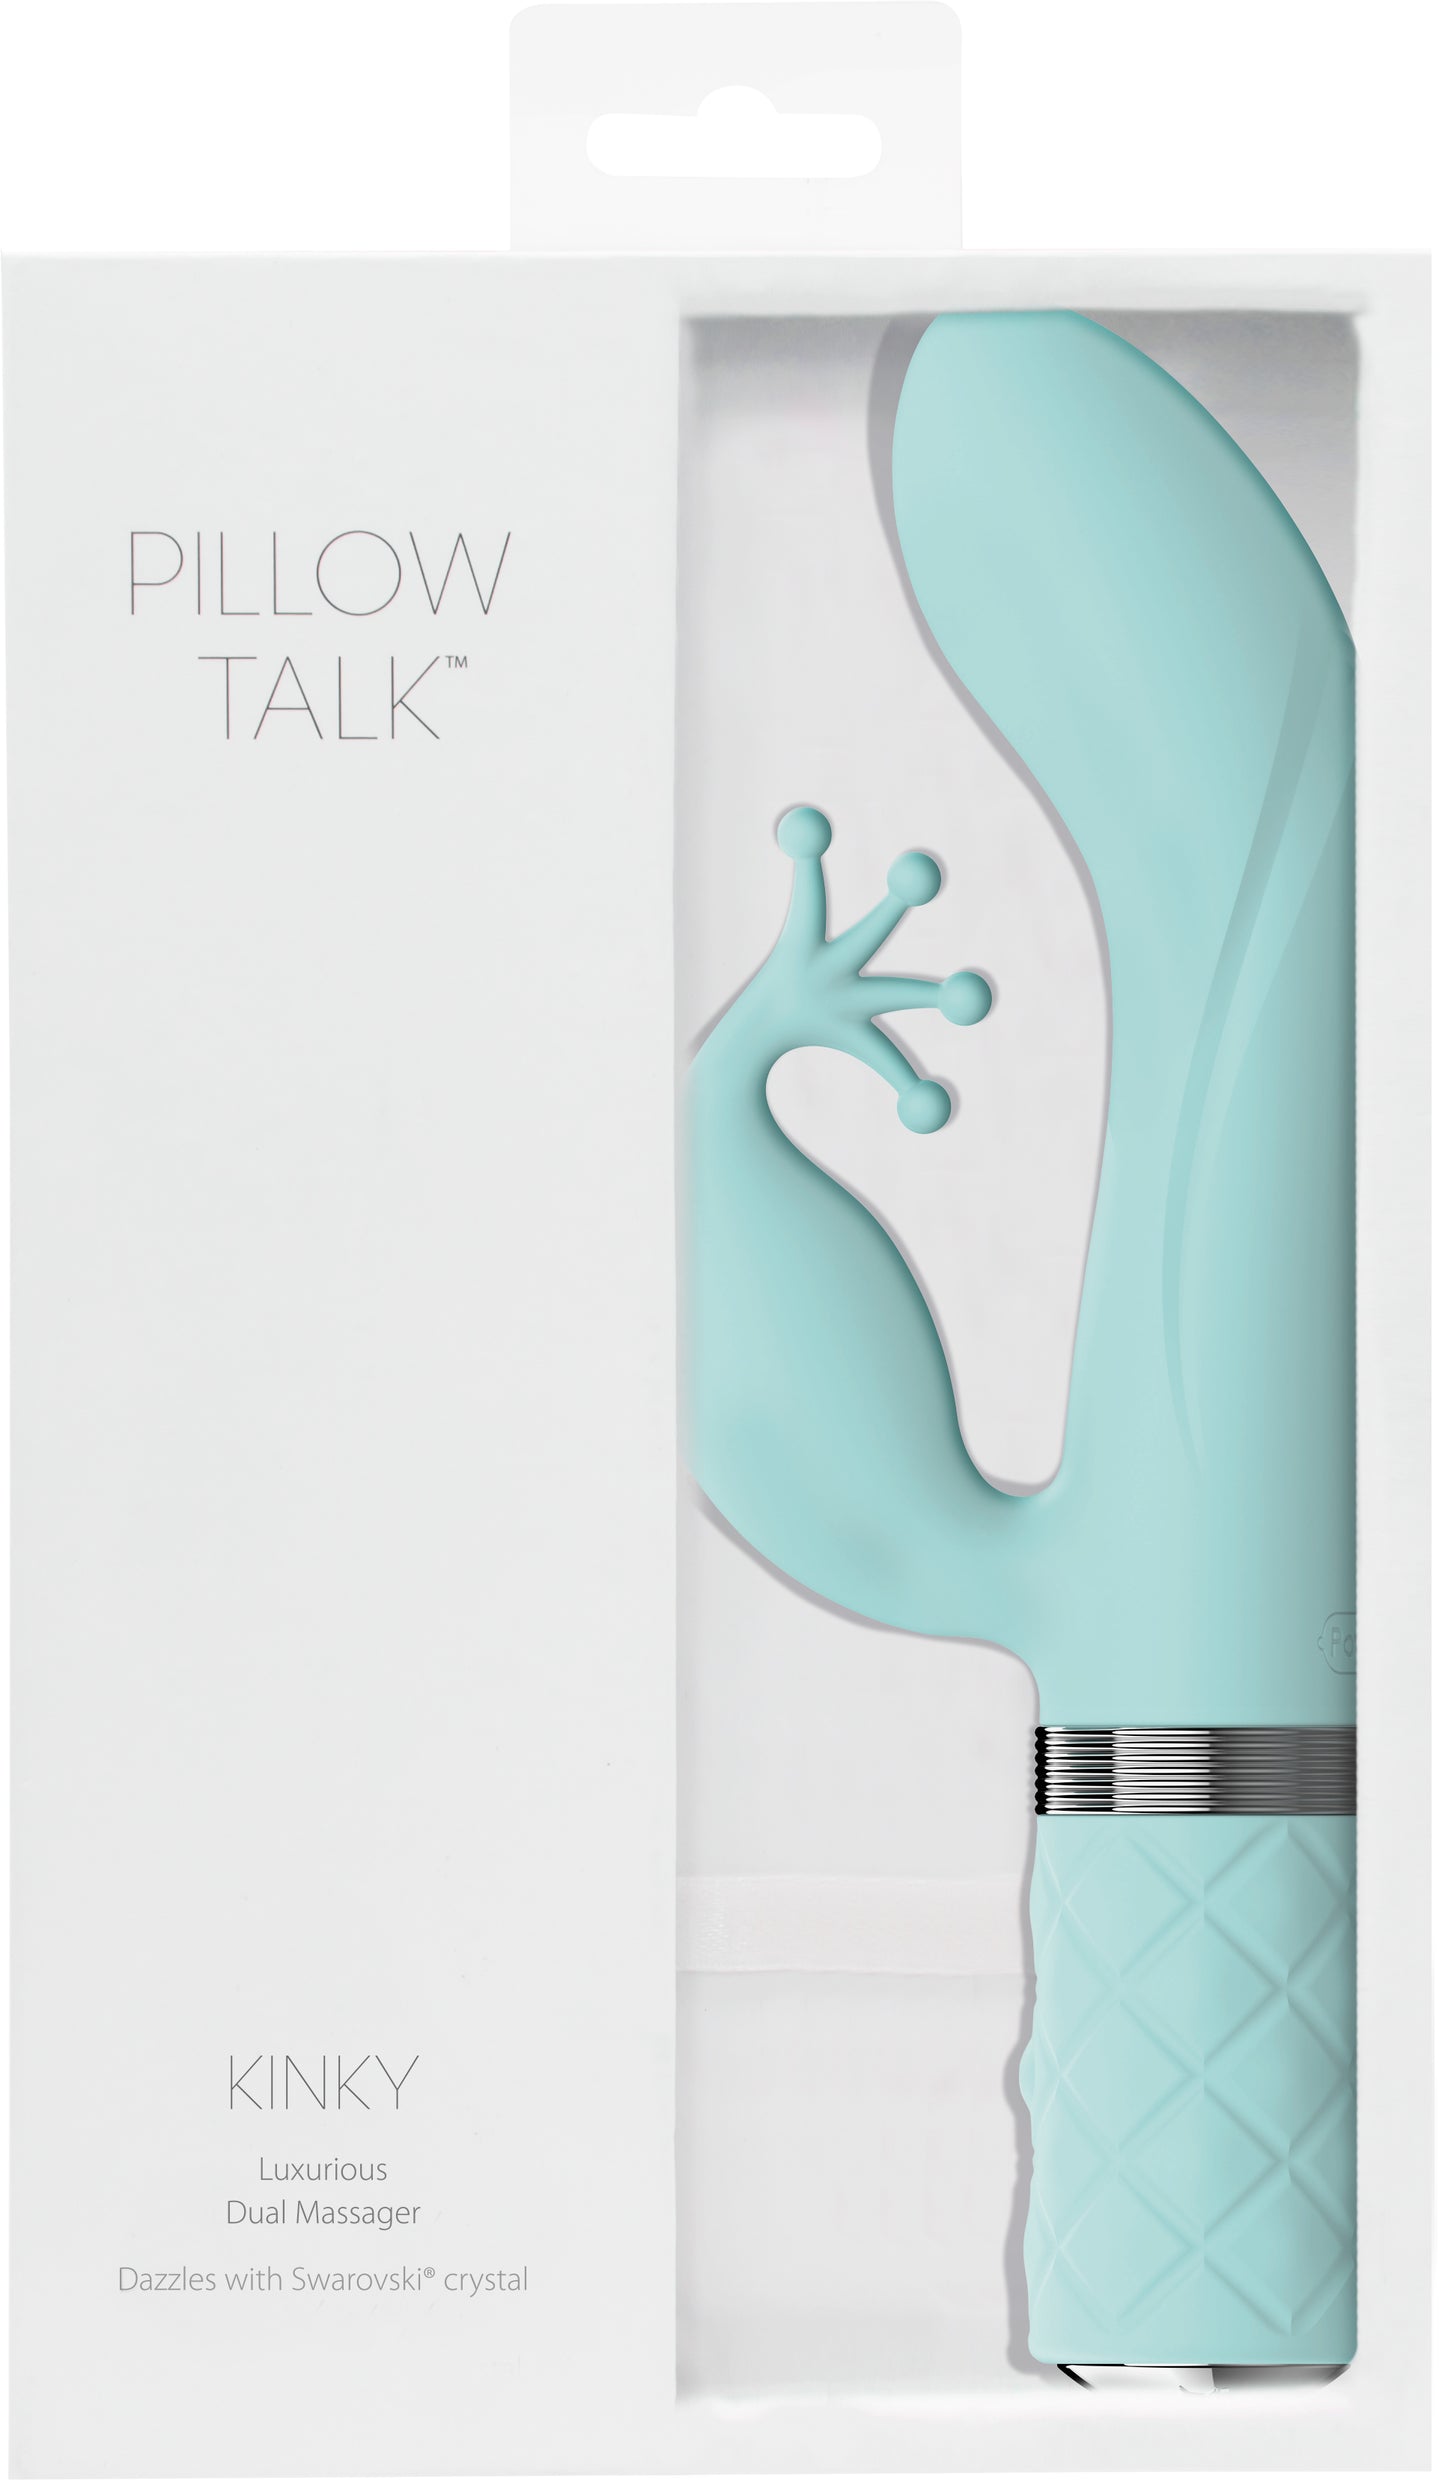 Pillow Talk Kinky Clitoral Stimulator With Swarovski Crystalteal - Just for you desires